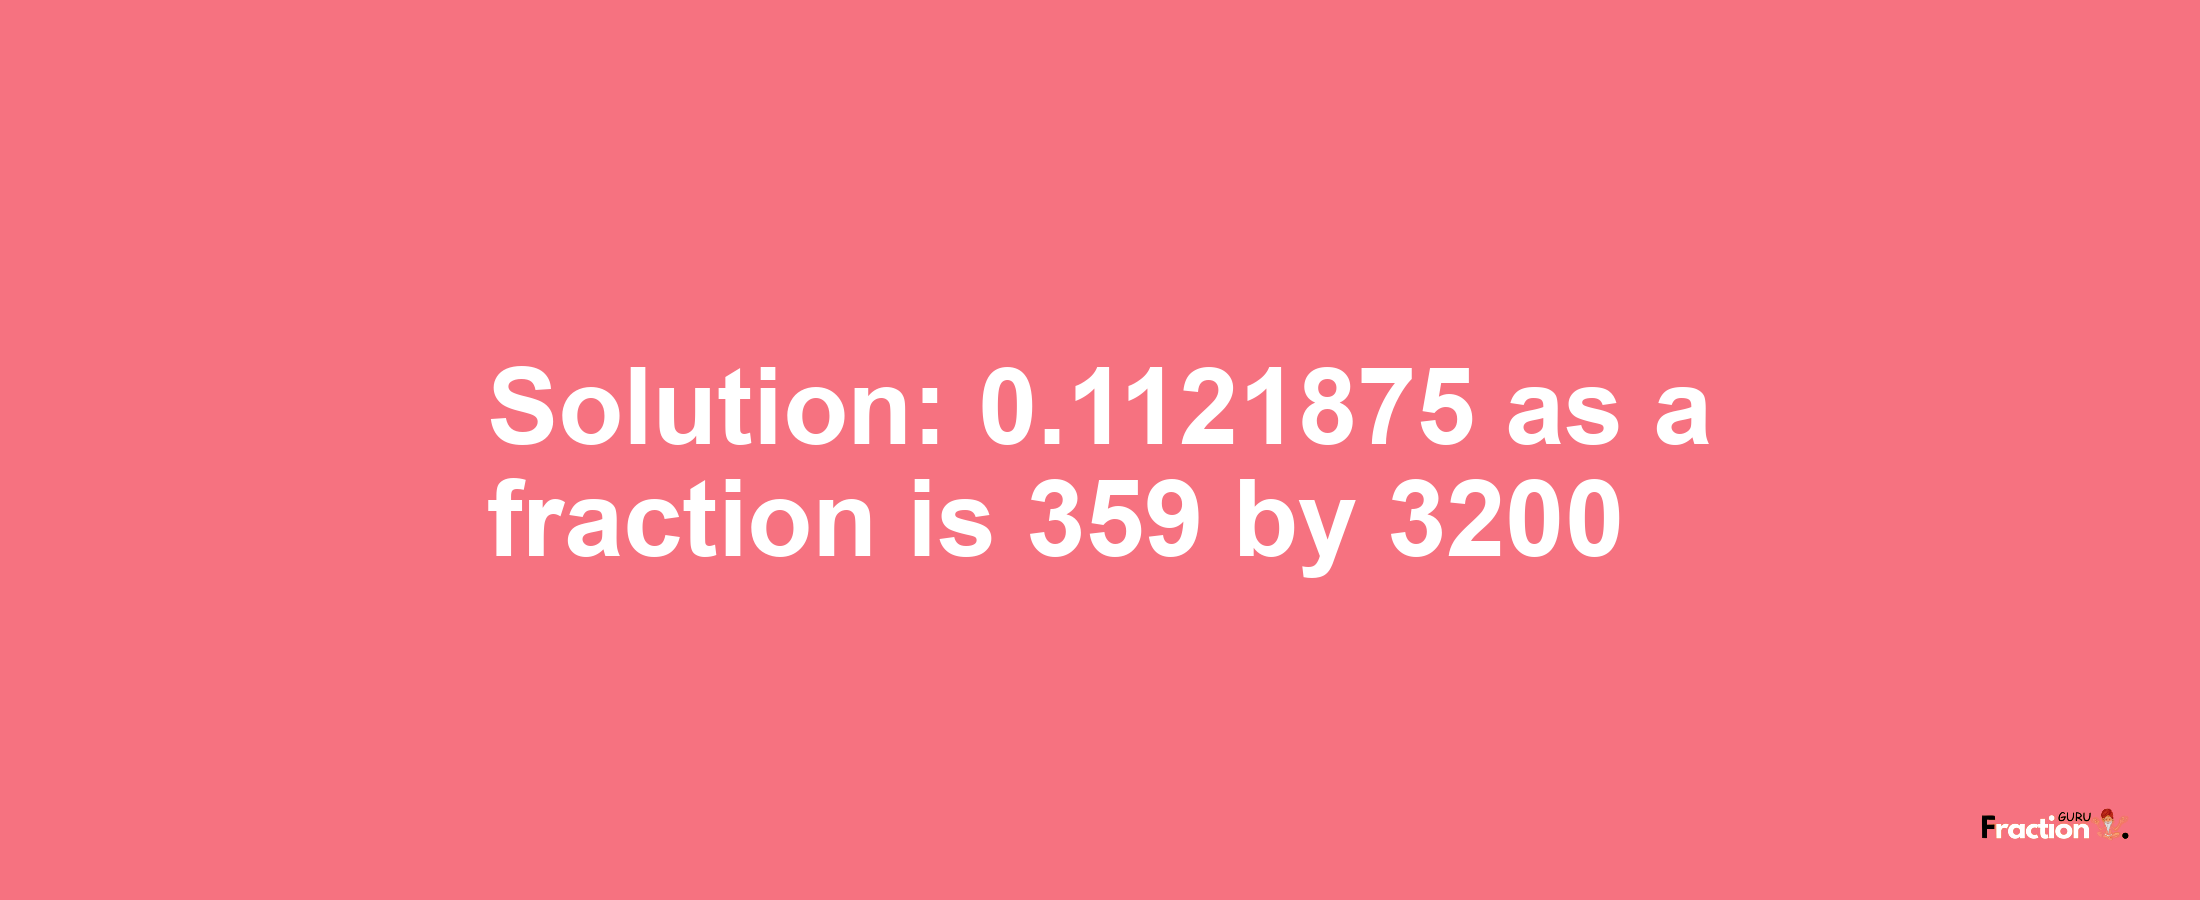 Solution:0.1121875 as a fraction is 359/3200